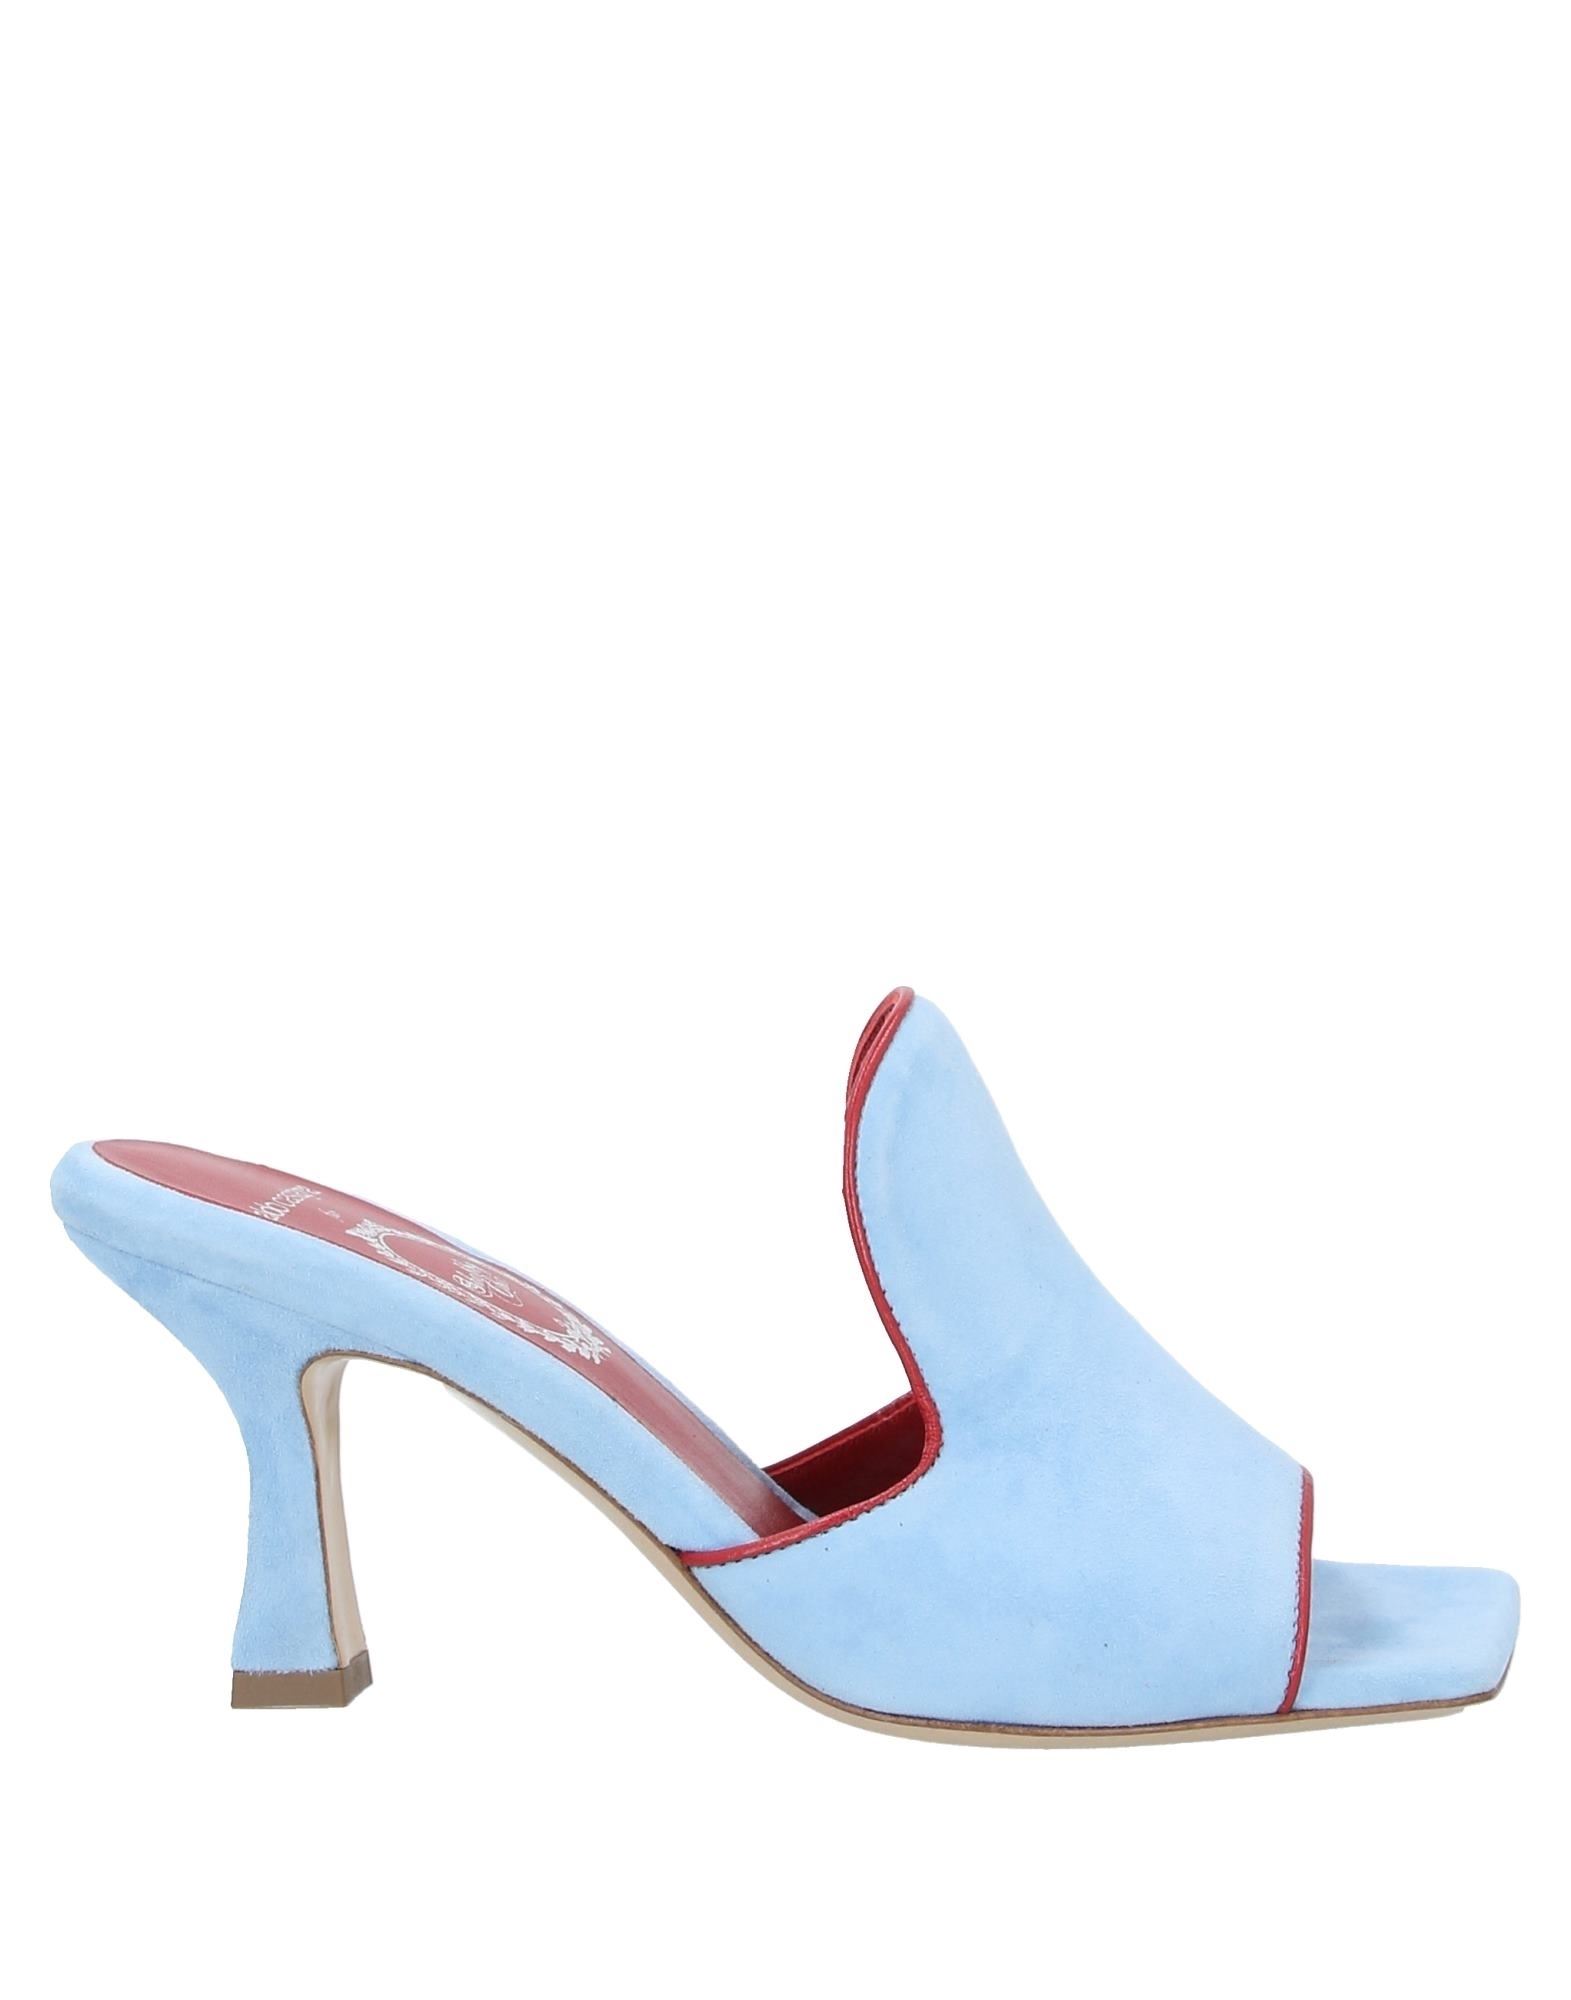 Aldo Castagna For Shabby Chic Sandals In Sky Blue